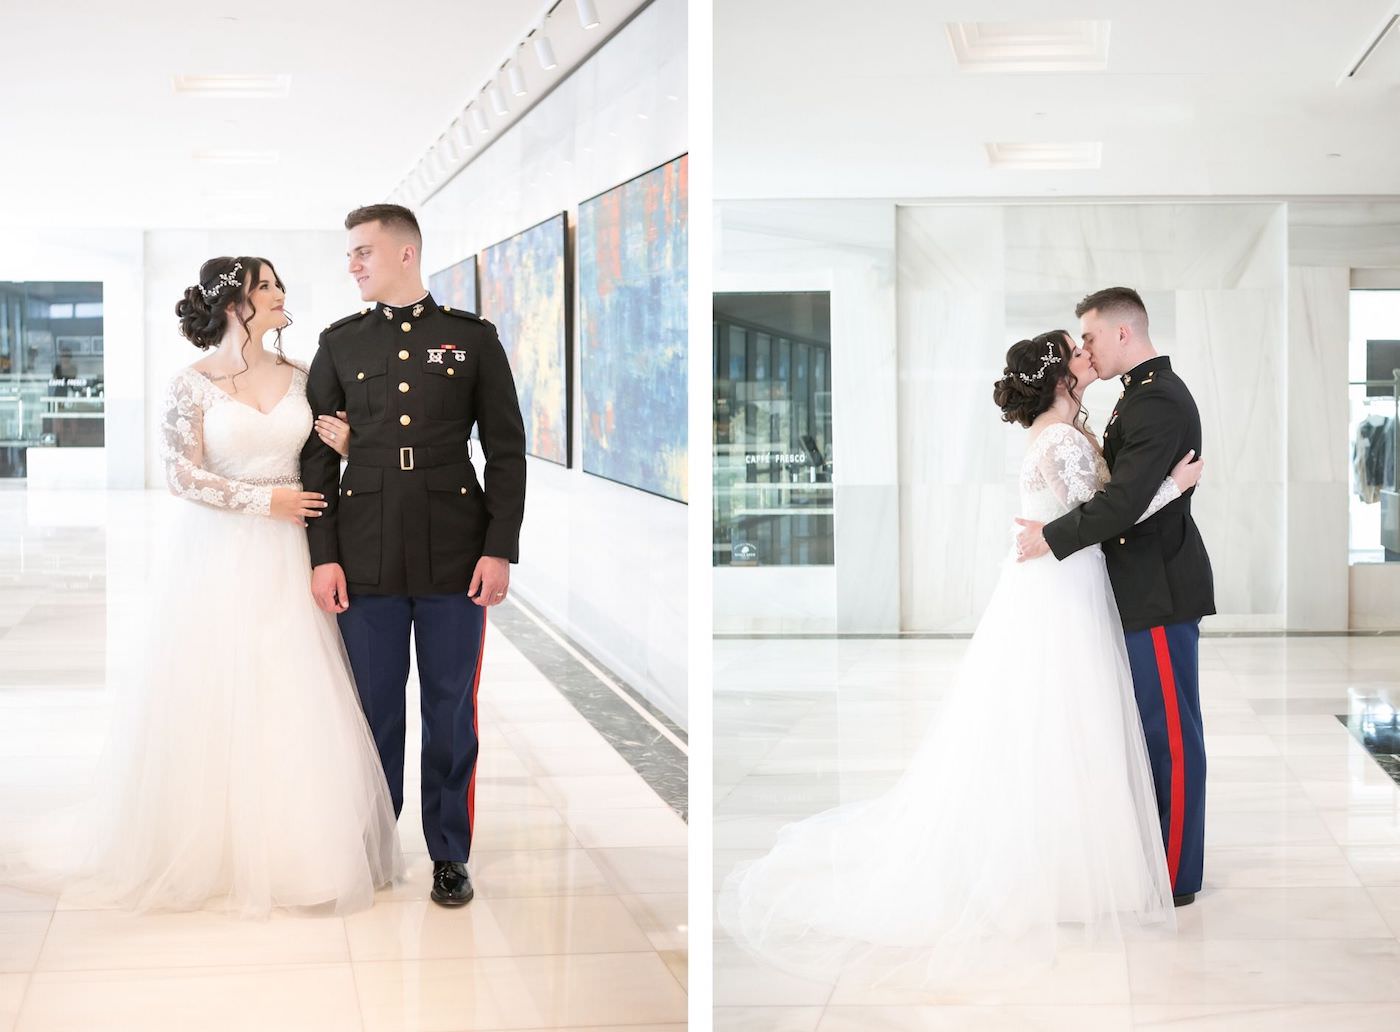 Romantic Whimsical Bride in Empire Waist Lace and Tulle Long Sleeve Wedding Dress and Military Groom in Dress Blues Uniform Portrait | Wedding Photographer Carrie Wildes Photography | Wedding Hair and Makeup Michele Renee the Studio